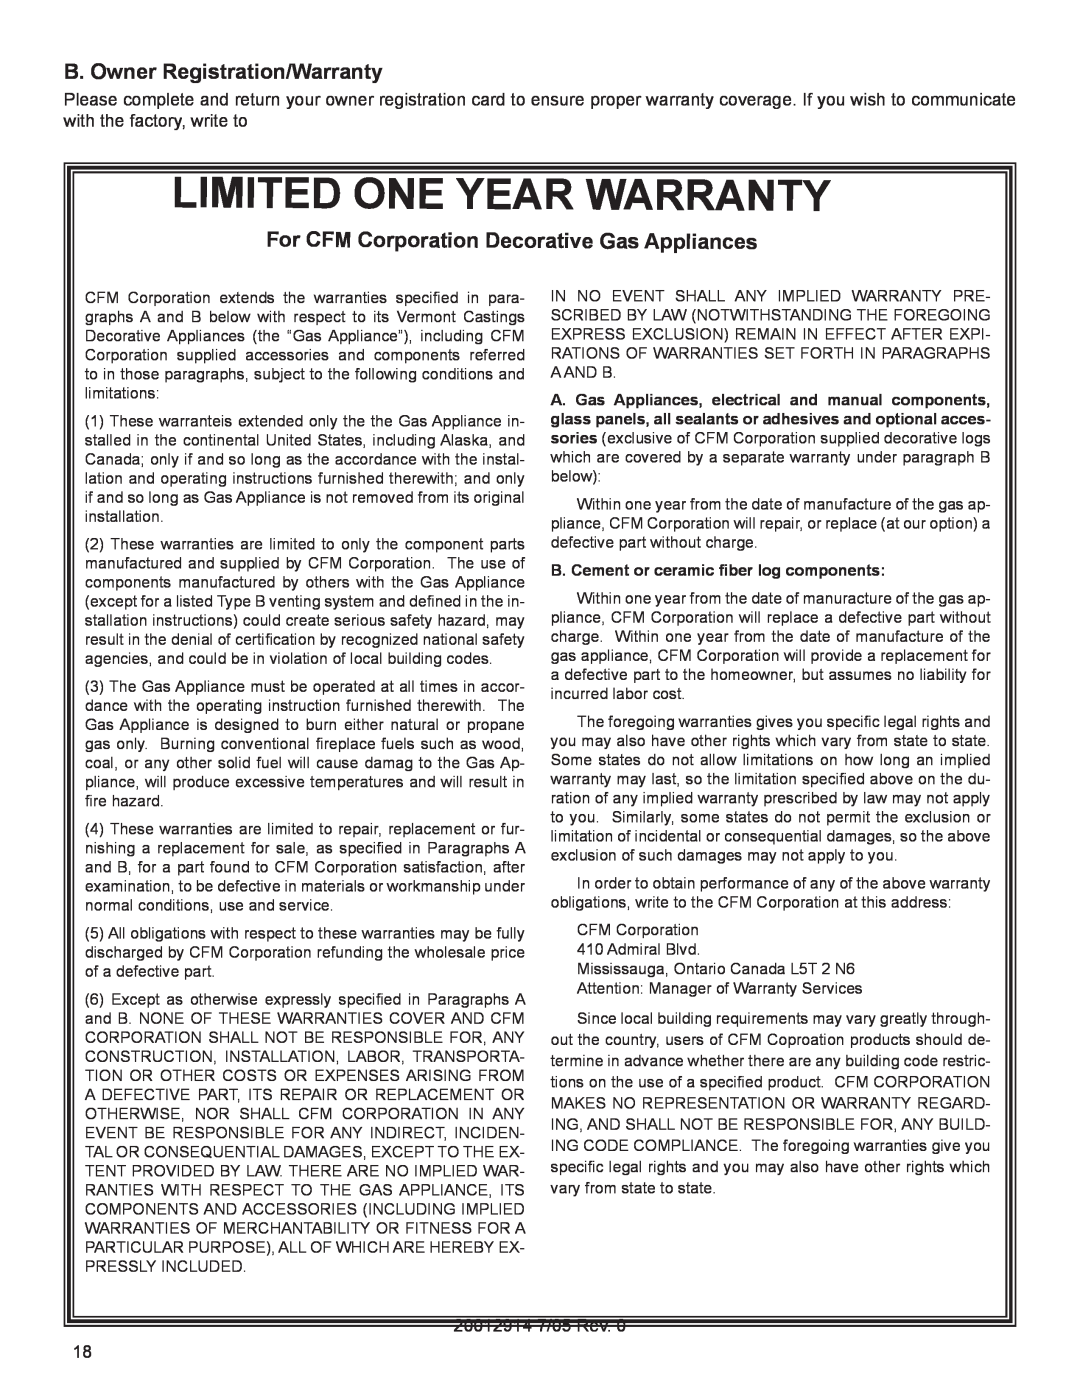 Vermont Casting MO18 Limited One Year Warranty, B. Owner Registration/Warranty, B. Cement or ceramic fiber log components 